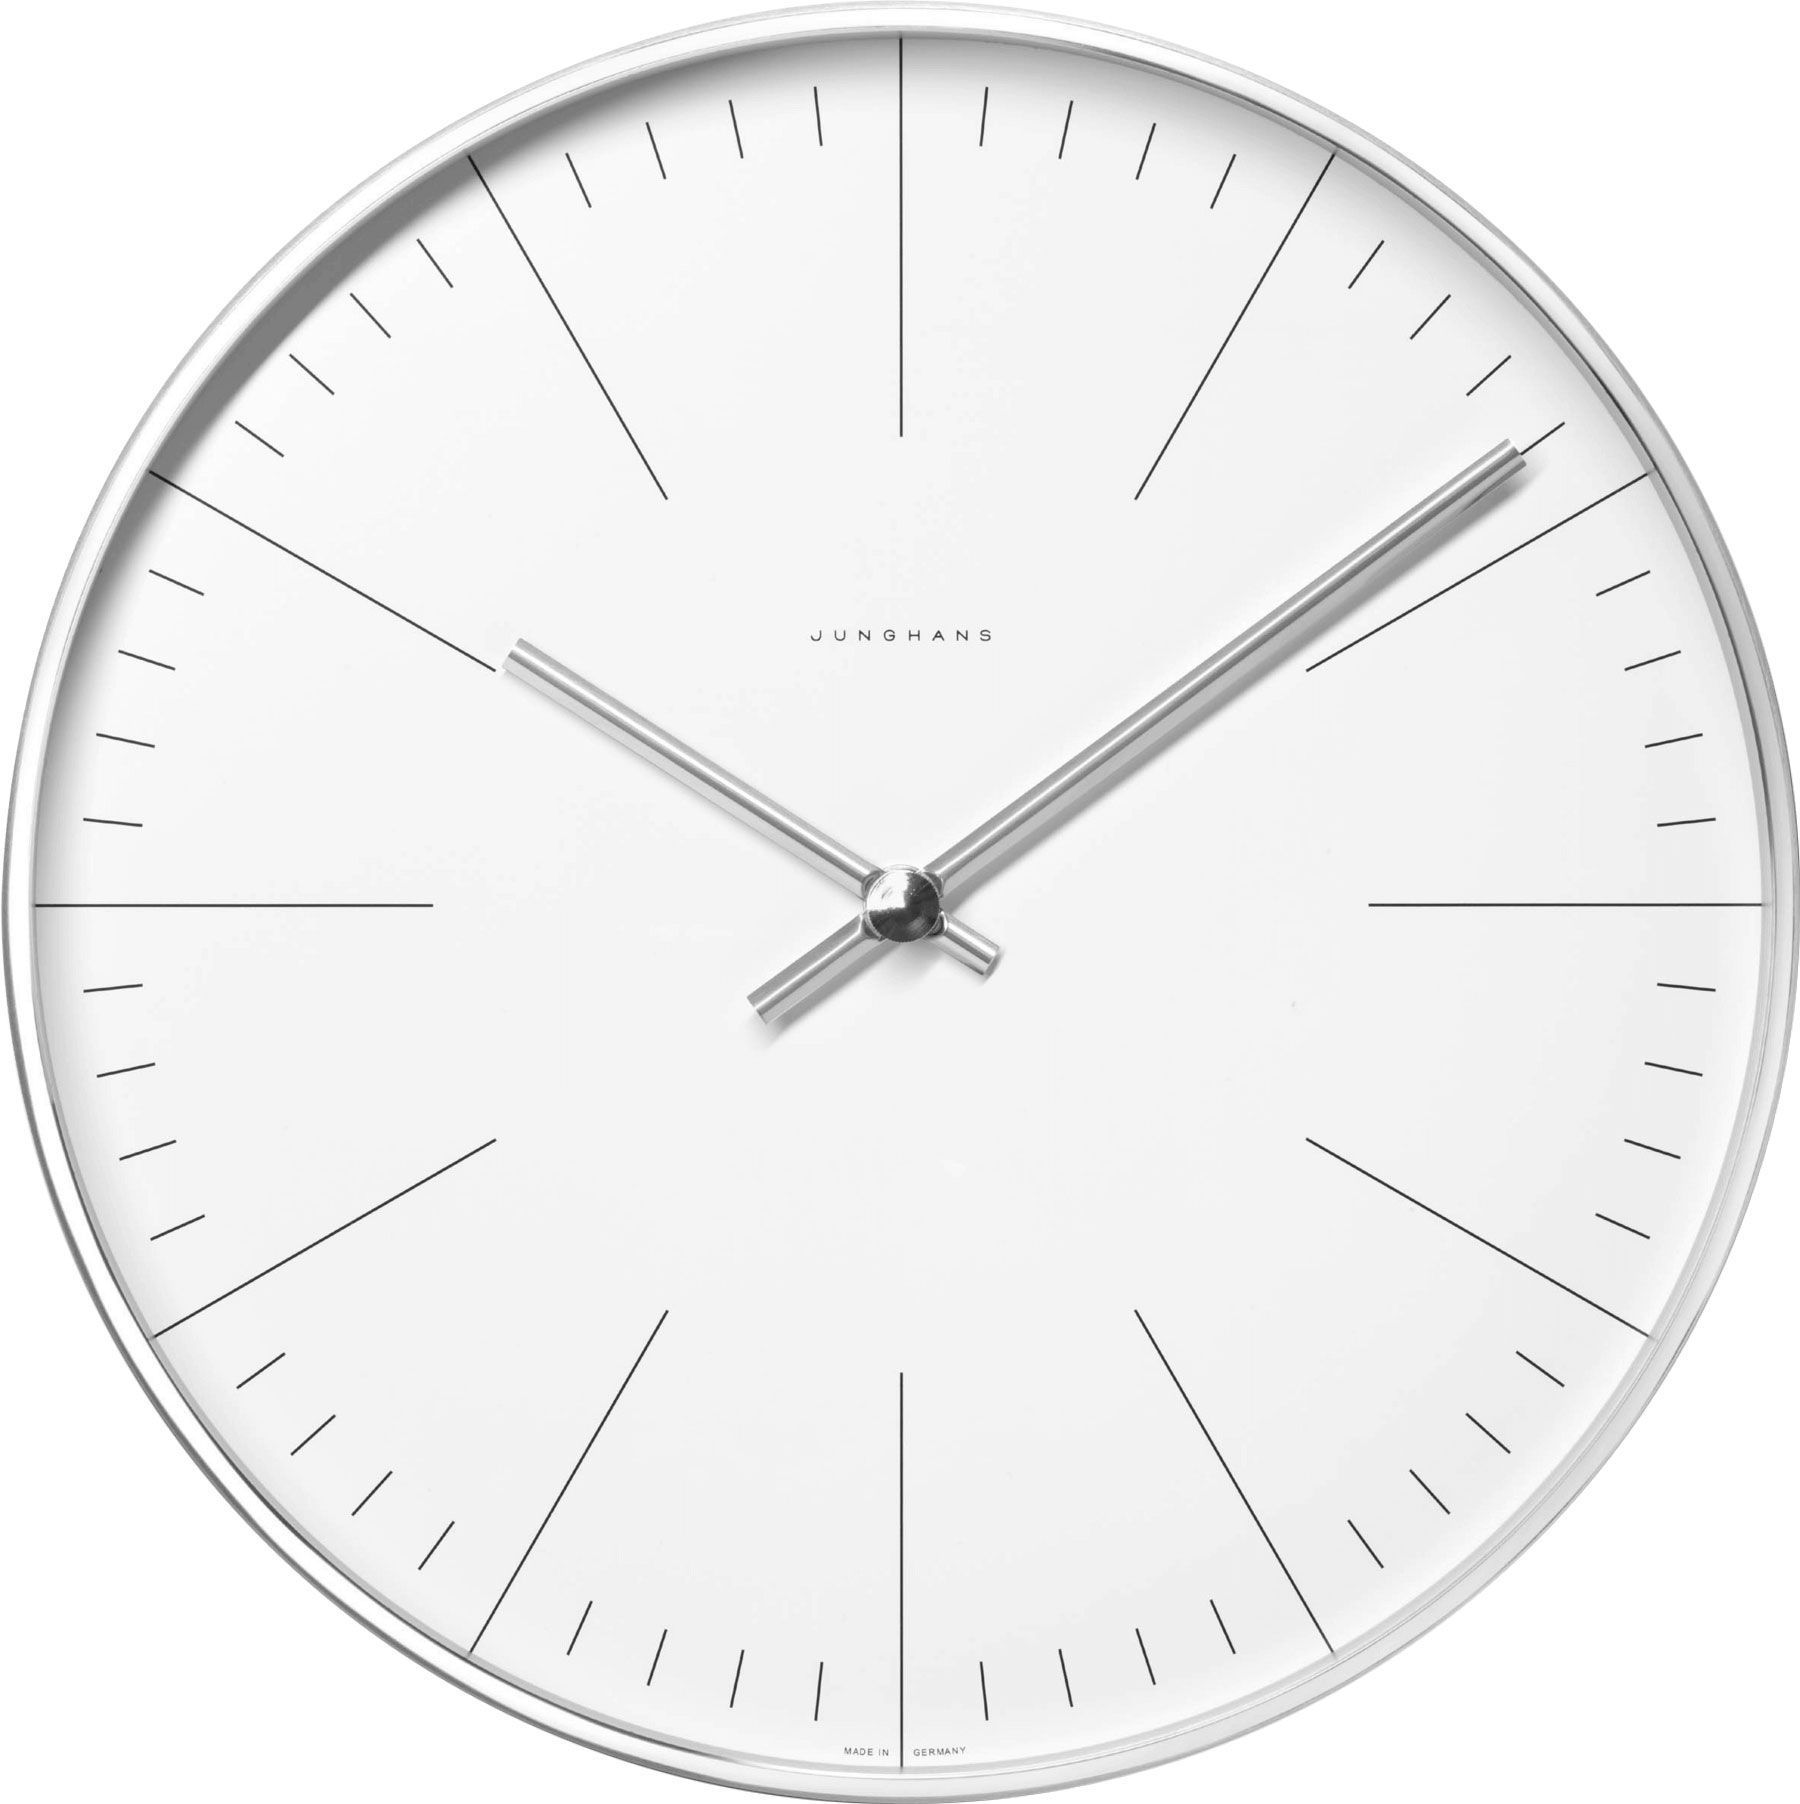 Junghans   Watch in White Dial - 1